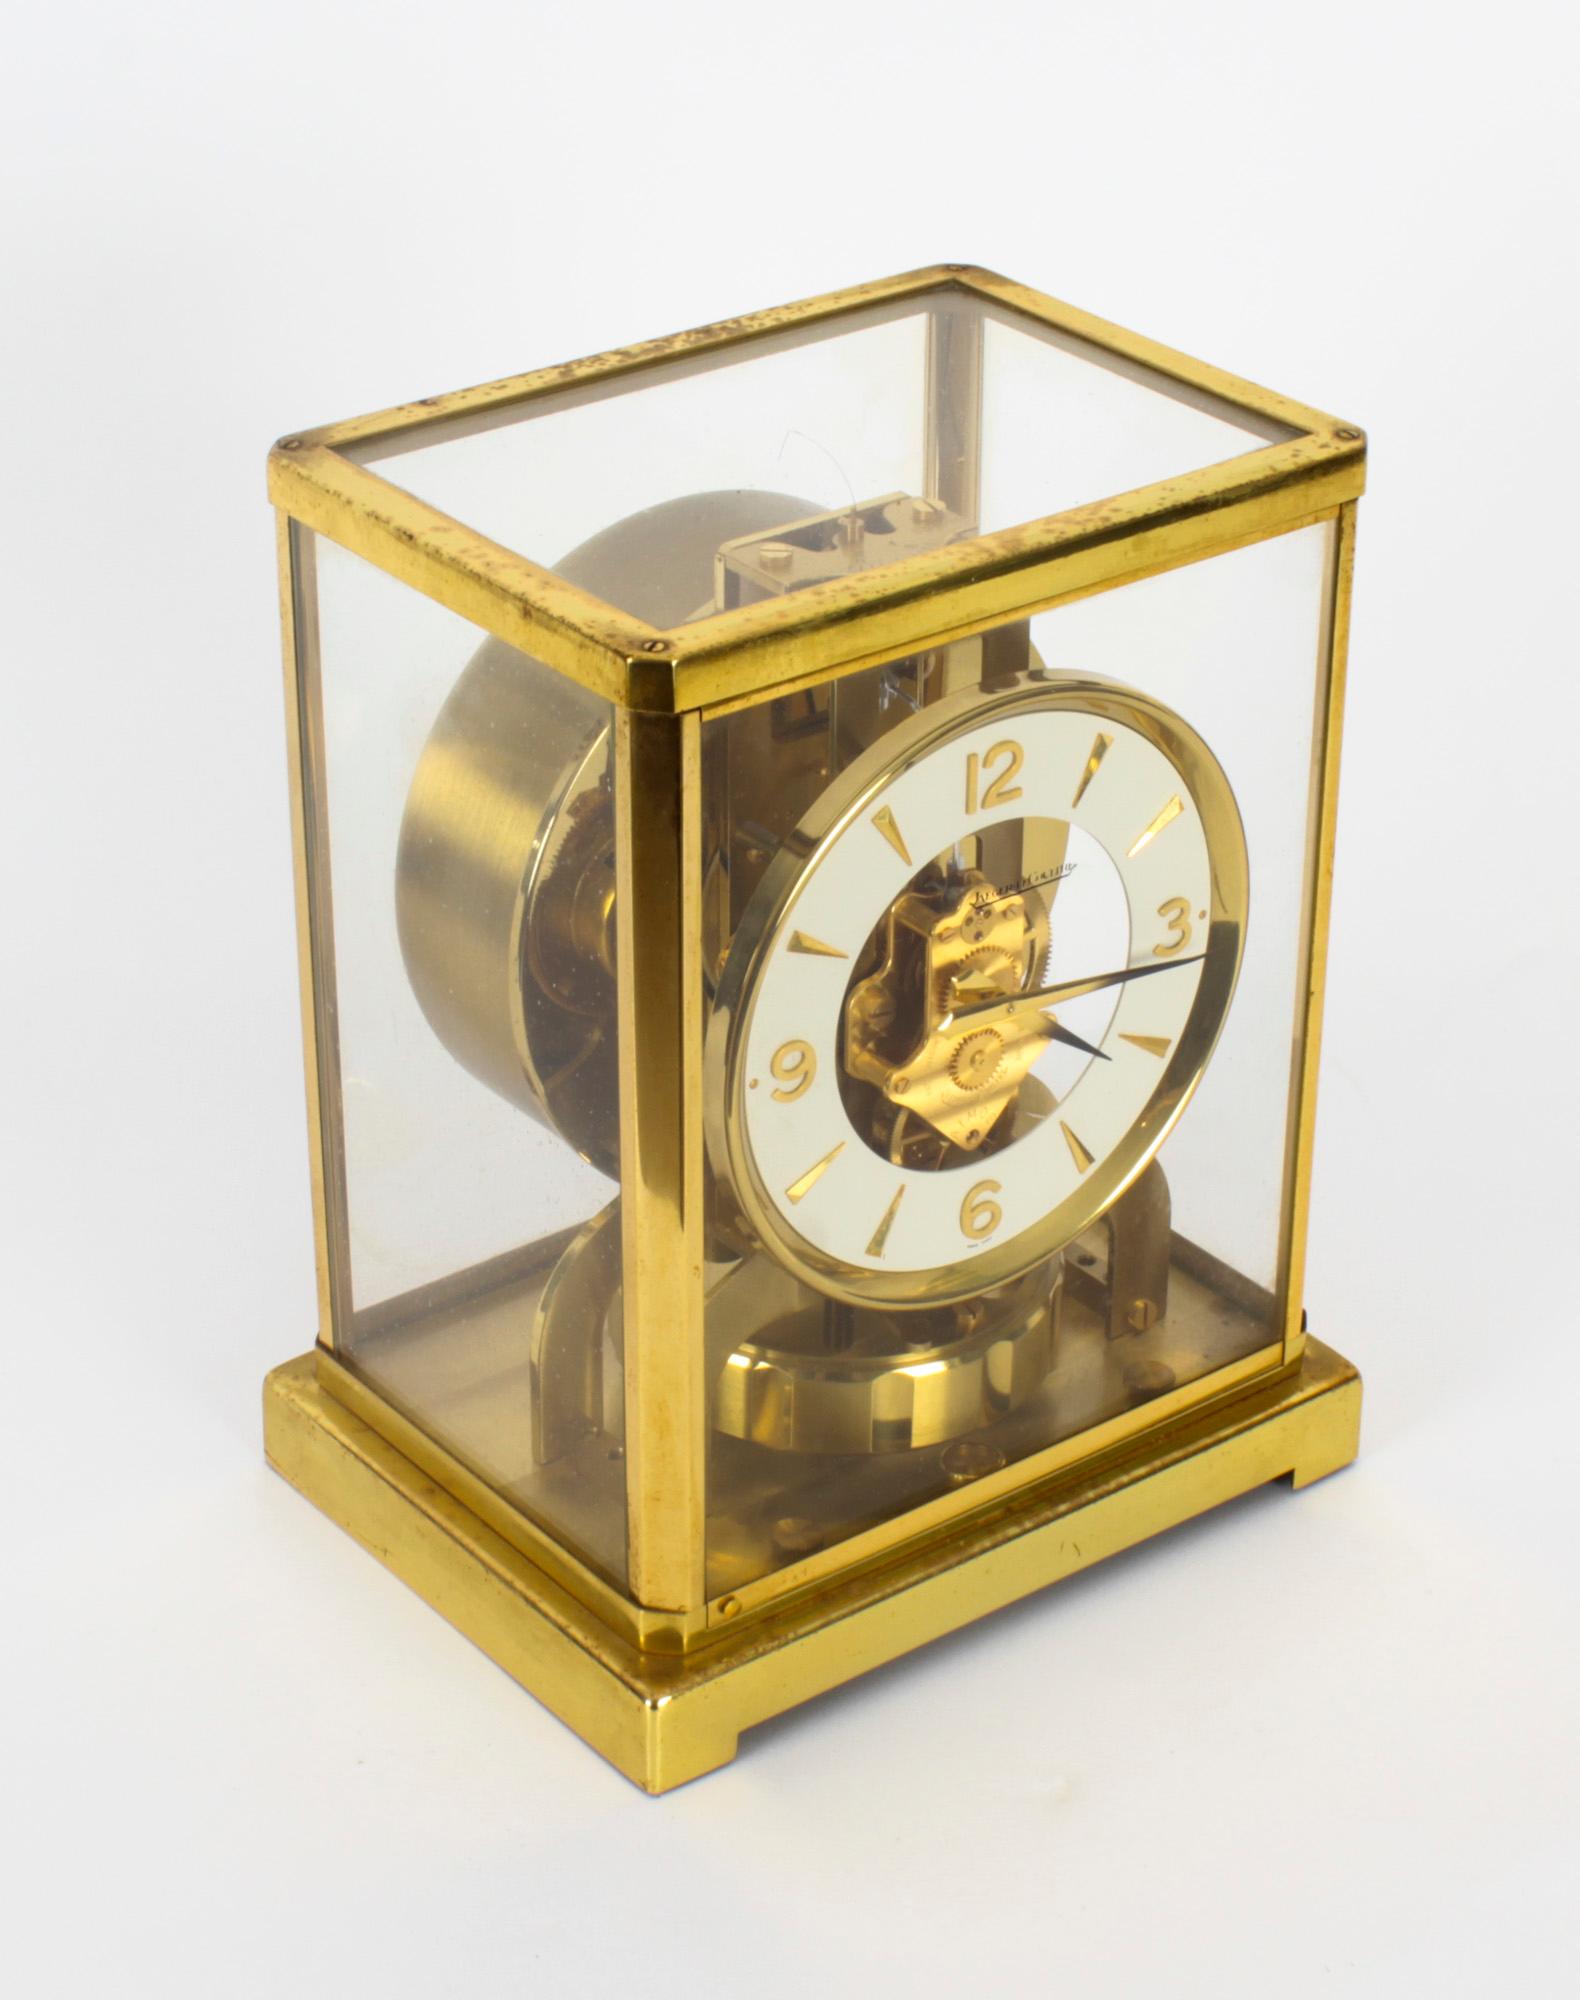 This is a very elegant Vintage Atmos perpetual mantle clock by Jaeger-LeCoultre, with a jewelled movement bearing their ref No. 138326 and dating from the mid 20th Century.

The clock is displayed in a polished gilt rectangular brass case with a